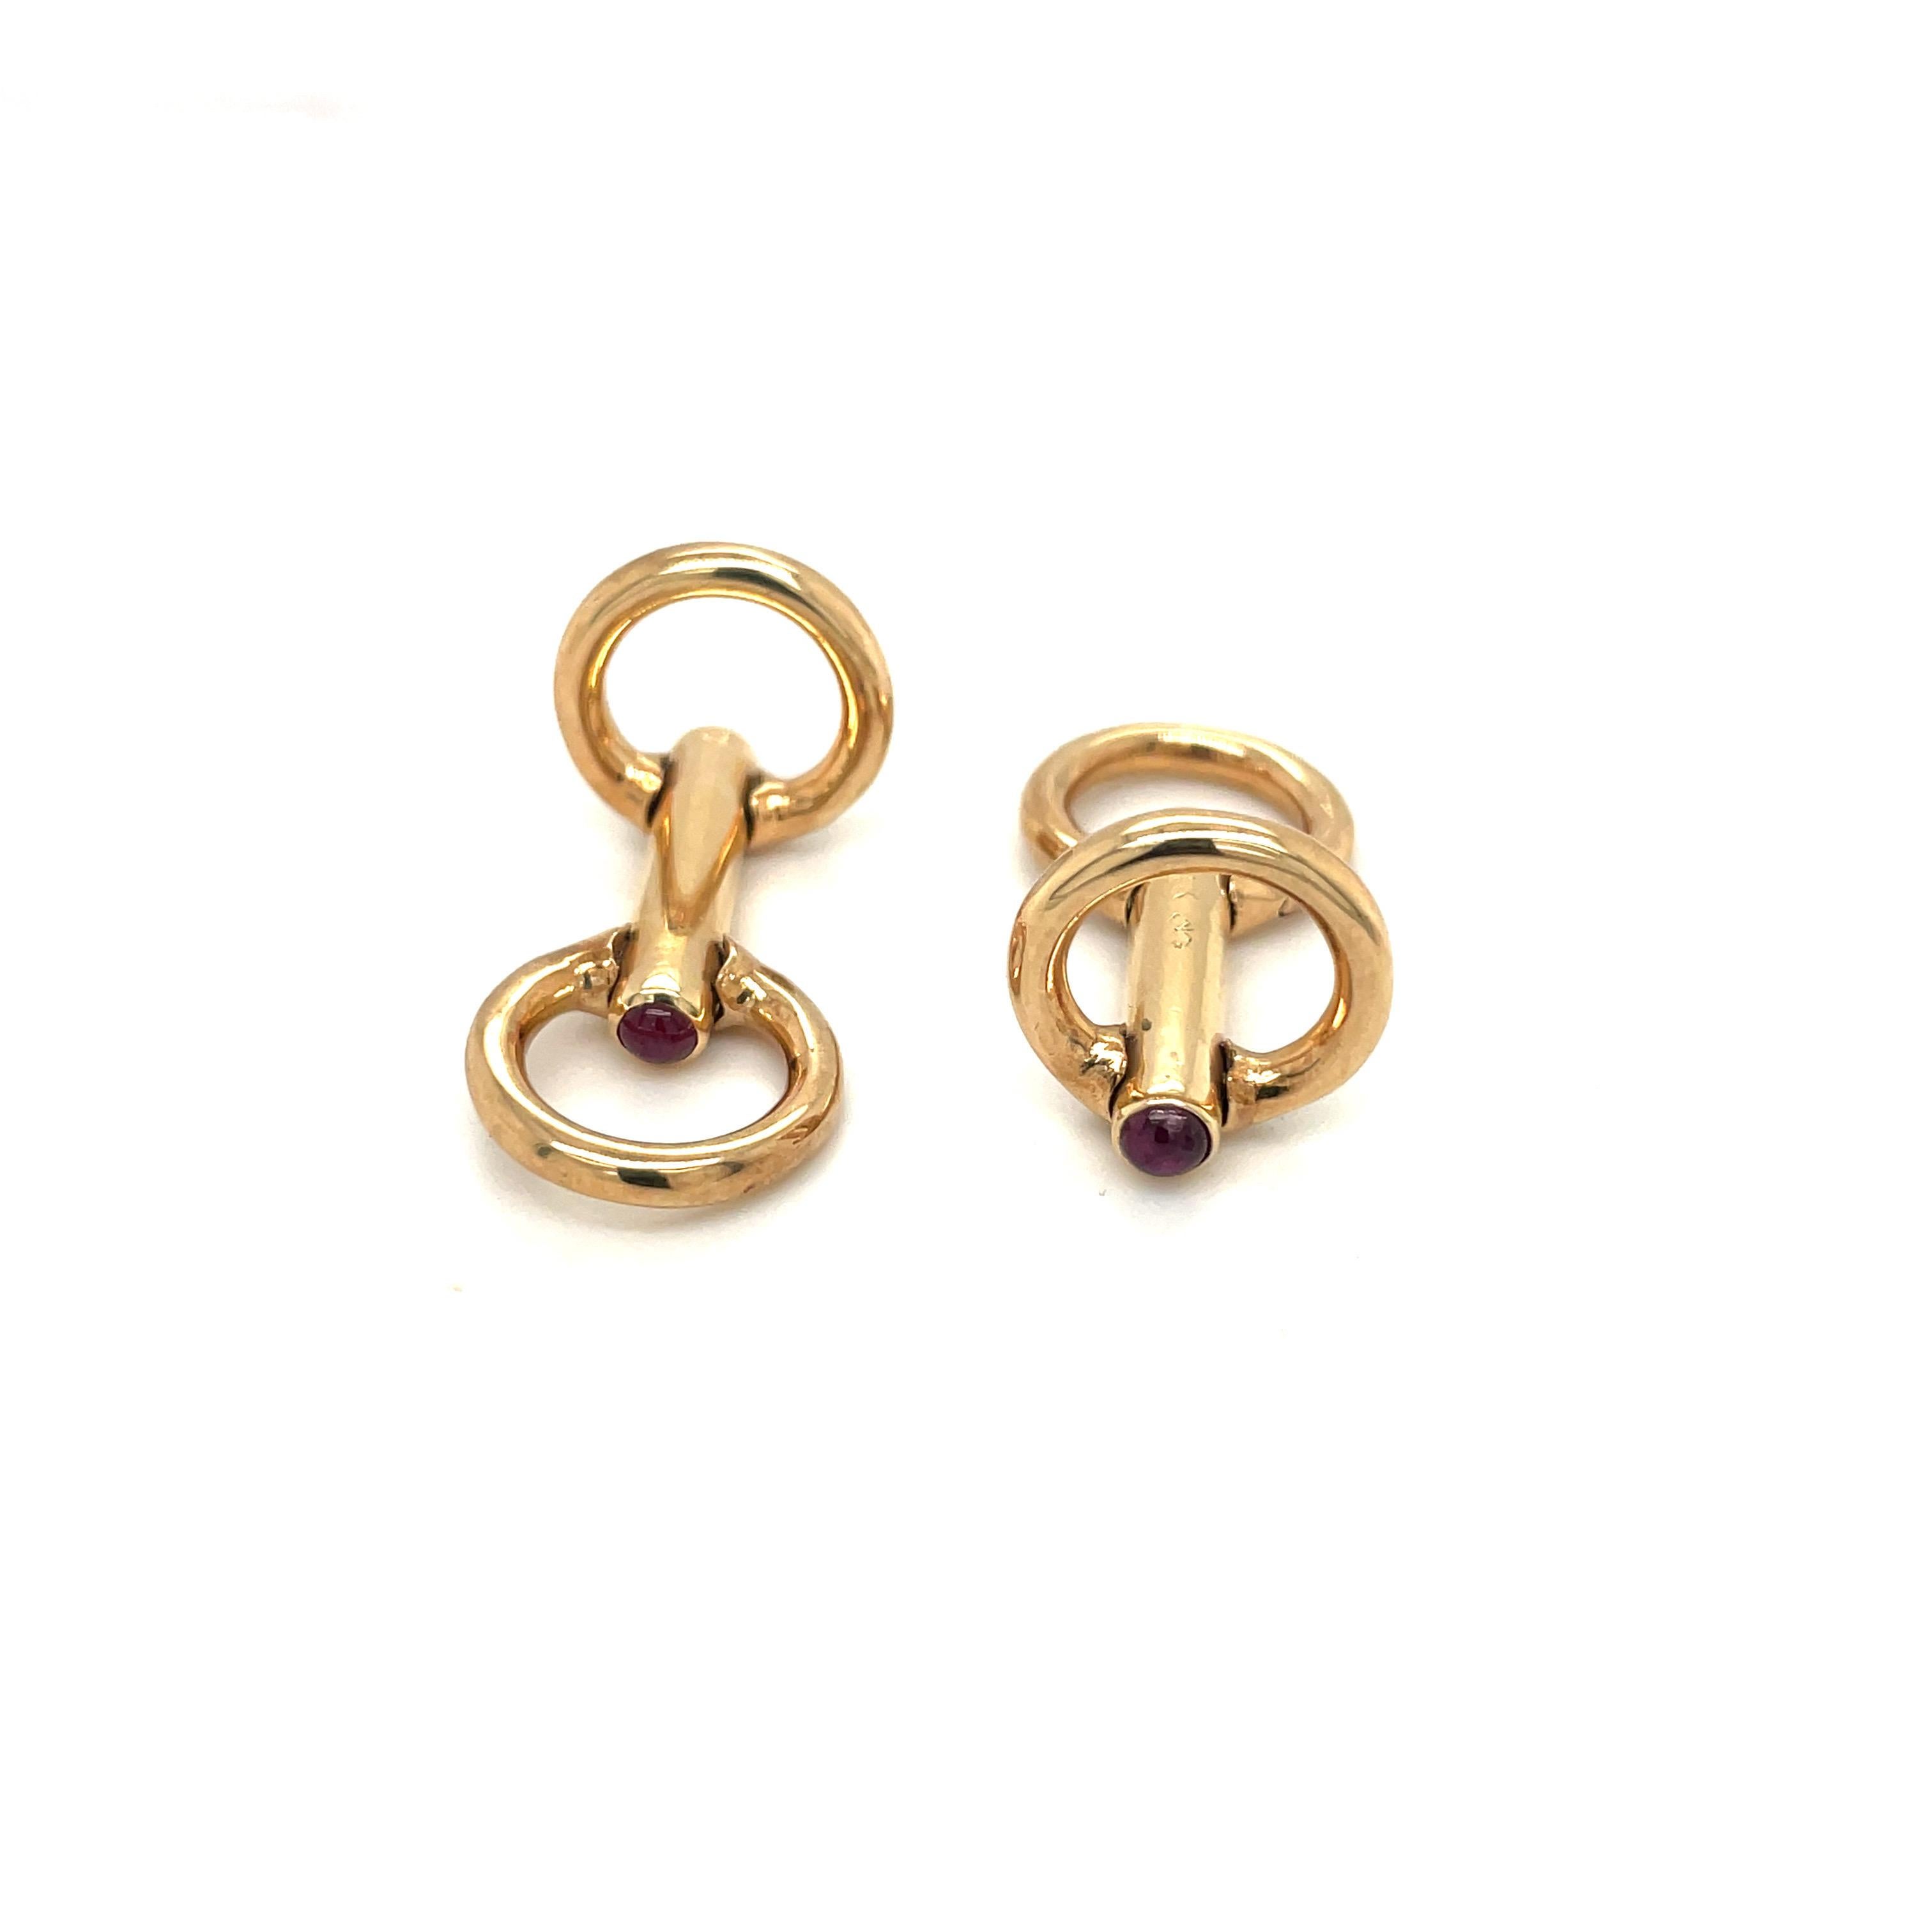 Classic 18 karat yellow gold bar style cuff links. The cuff links are designed with 2 flexible gold circles on each end, tipped with ruby cabochons. They measure 1.25